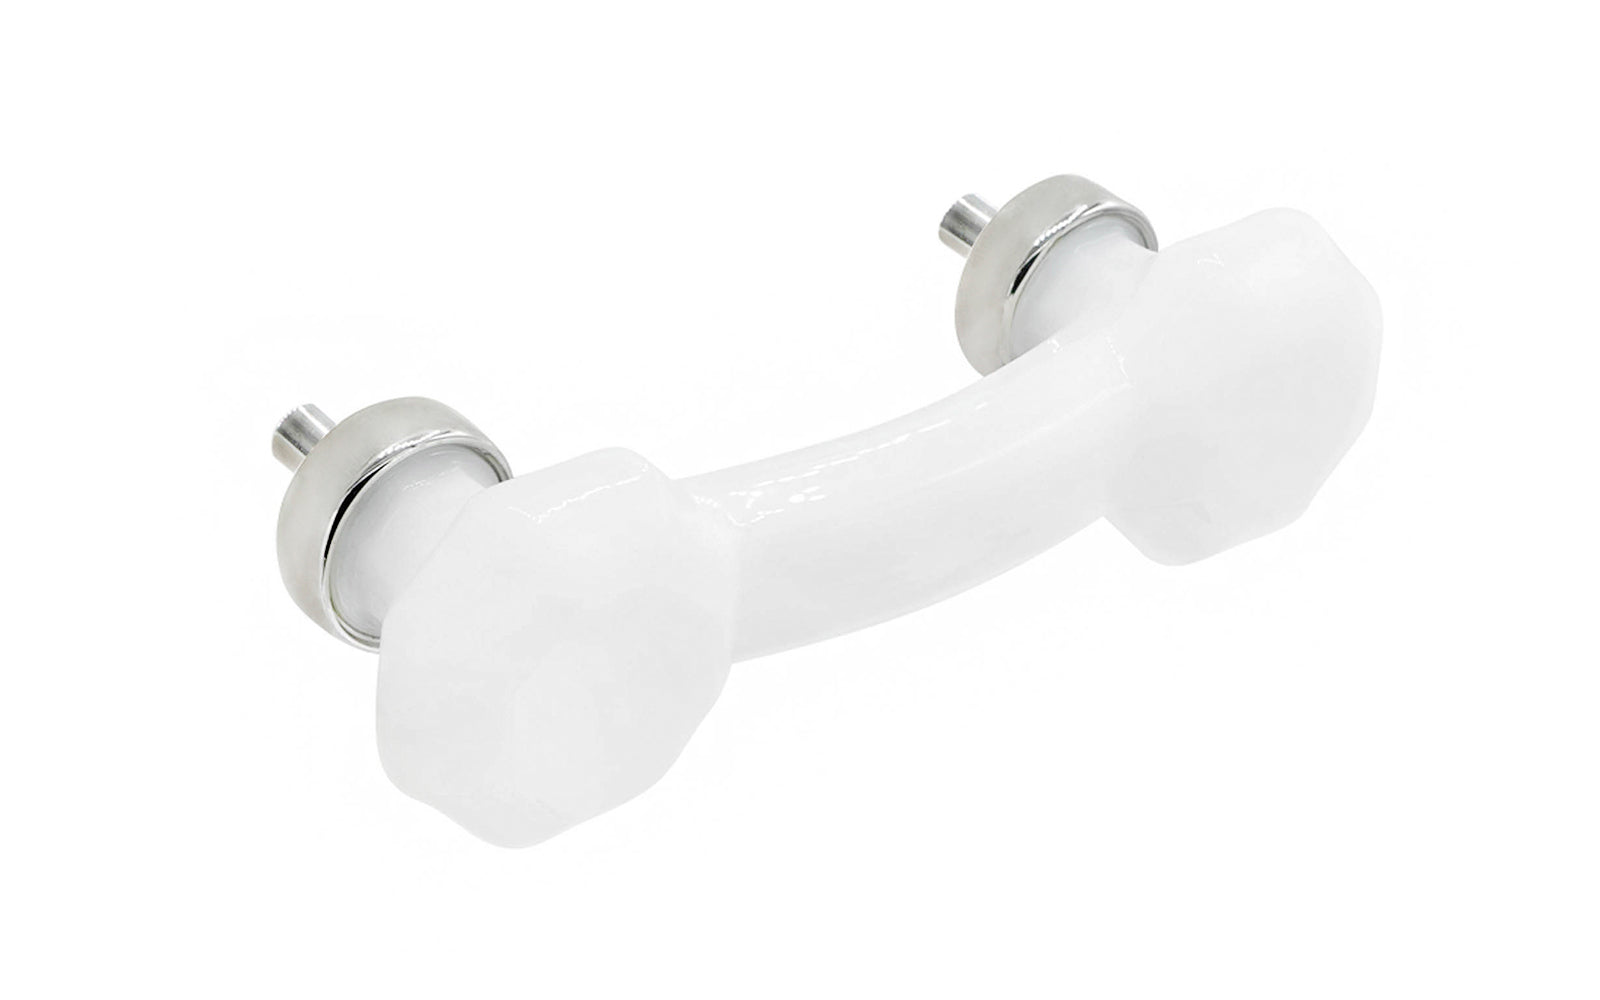 Elegant & classic octagonal cabinet glass pull with an attractive "Translucent White Opal" / "Milk White" color. The pull handle has 3" on centers. The glass is carefully set into a handsome solid brass bases with threaded shanks in the back. Octagon Glass pull. 3" center to center. Polished Nickel finish.